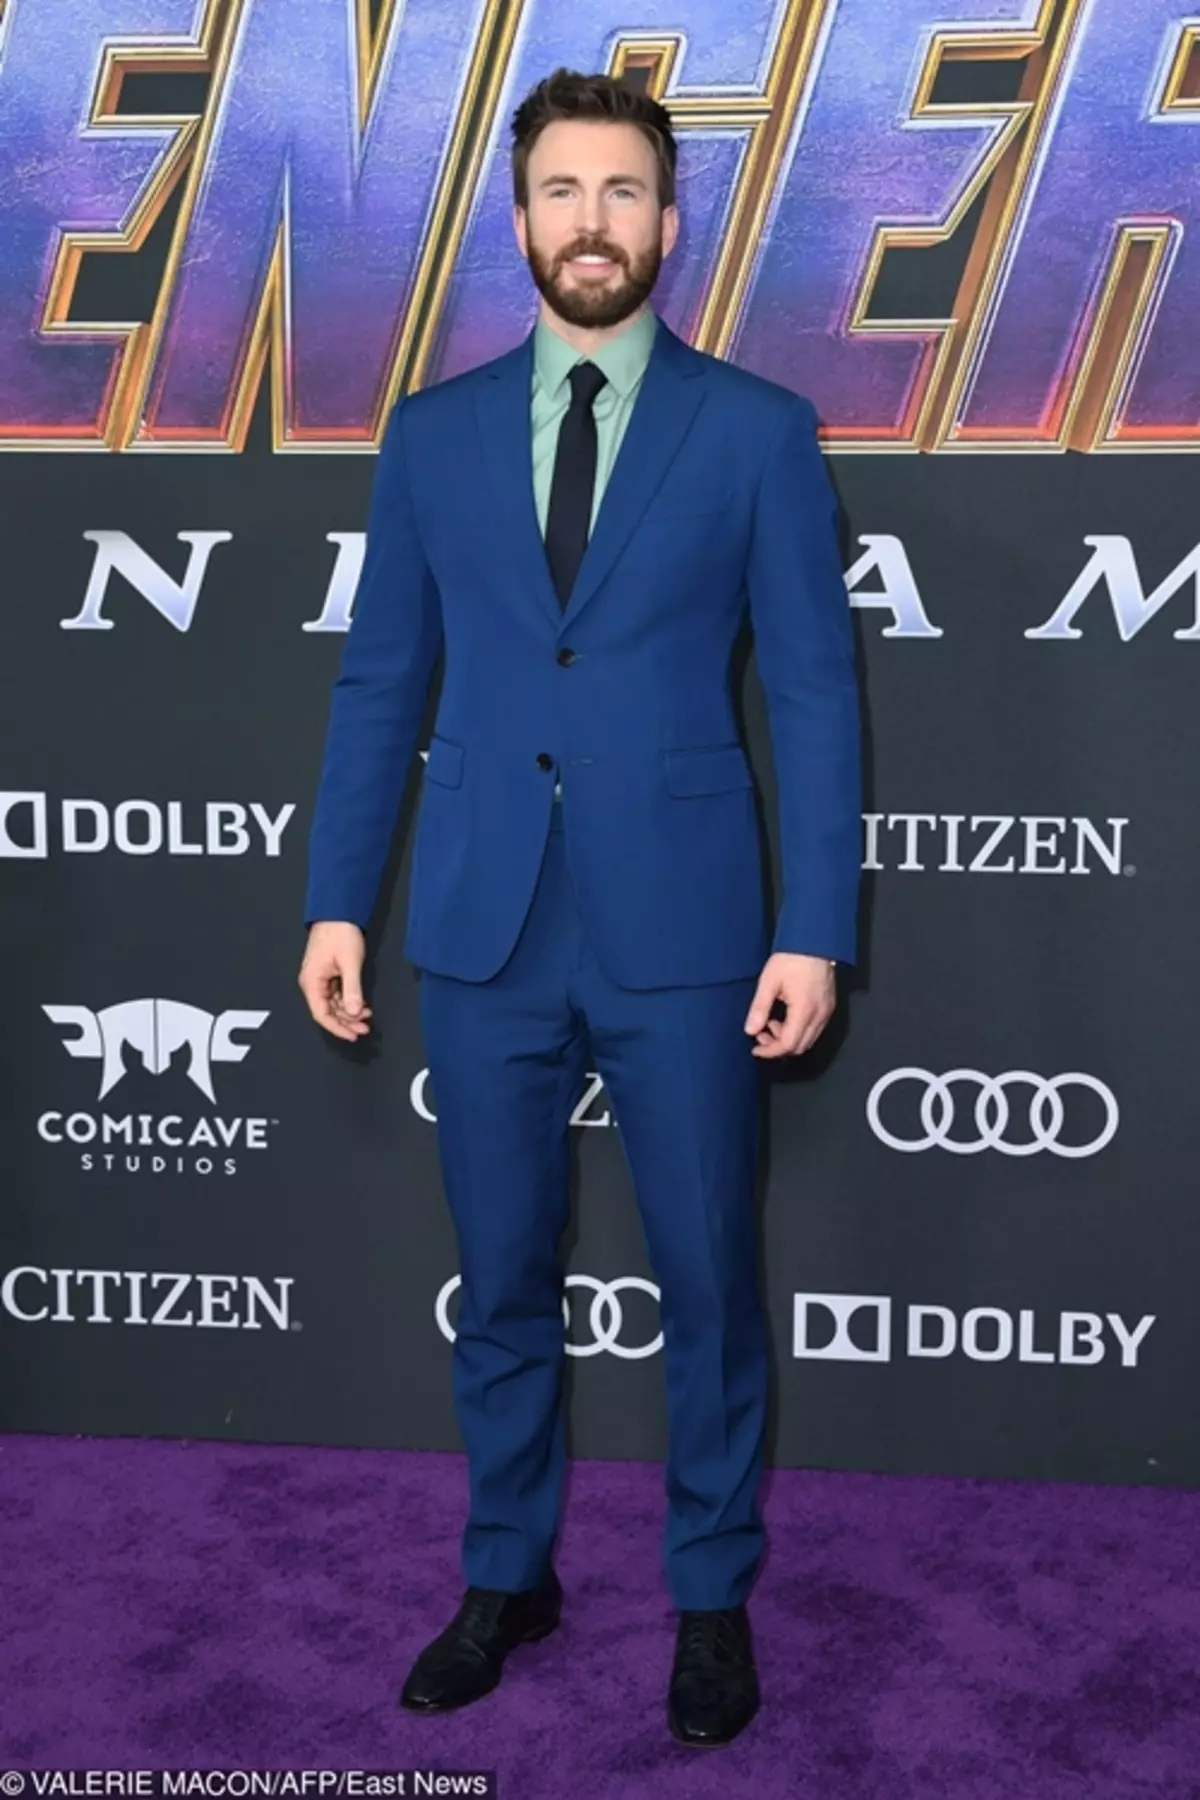 Robert Downey Jr., Chris Evans and other stars at the premiere of the film 